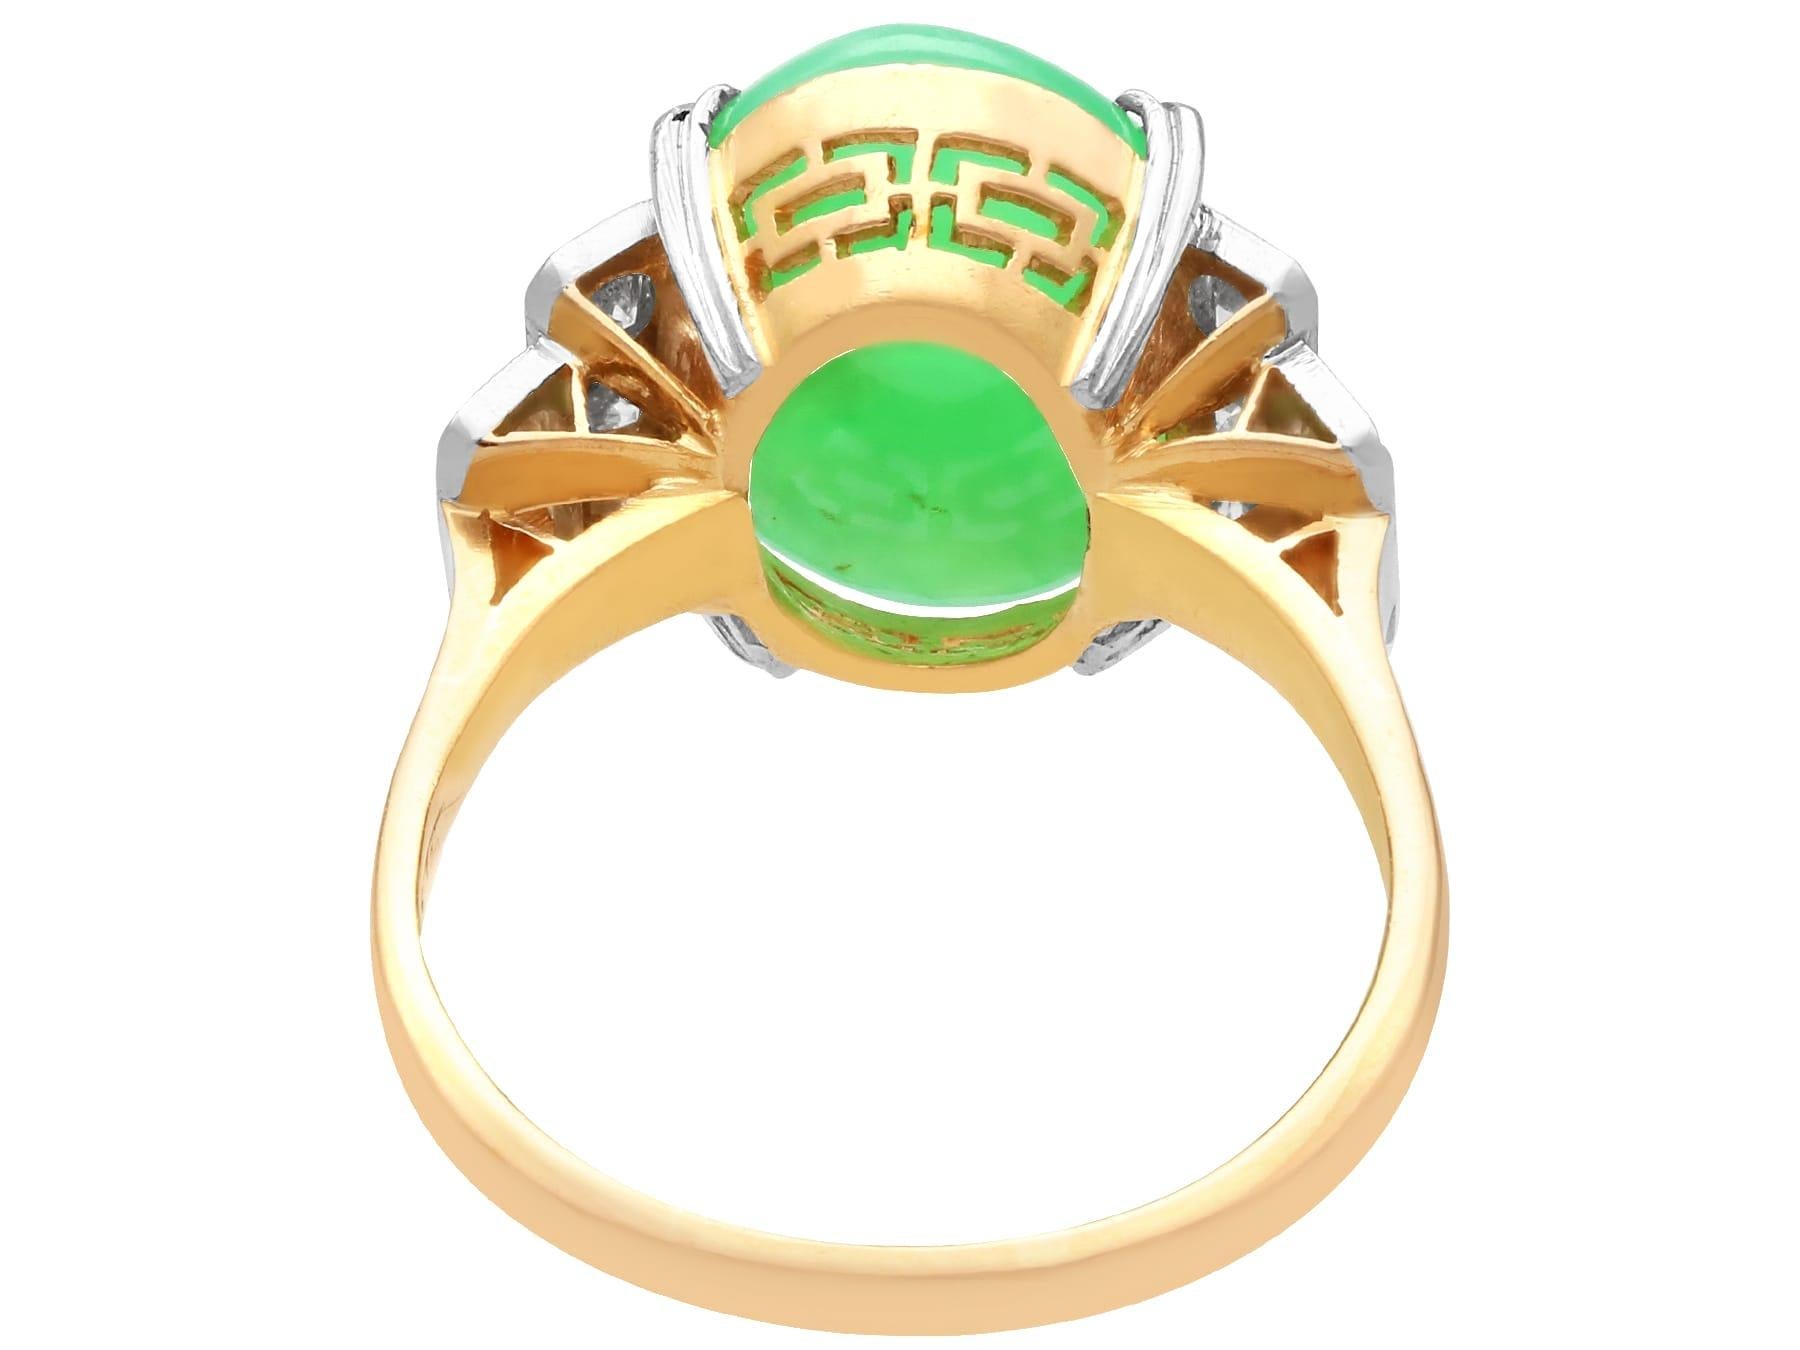 Vintage 7.02ct Jadeite and 0.70ct Diamond 22k Yellow Gold Dress Ring In Excellent Condition For Sale In Jesmond, Newcastle Upon Tyne